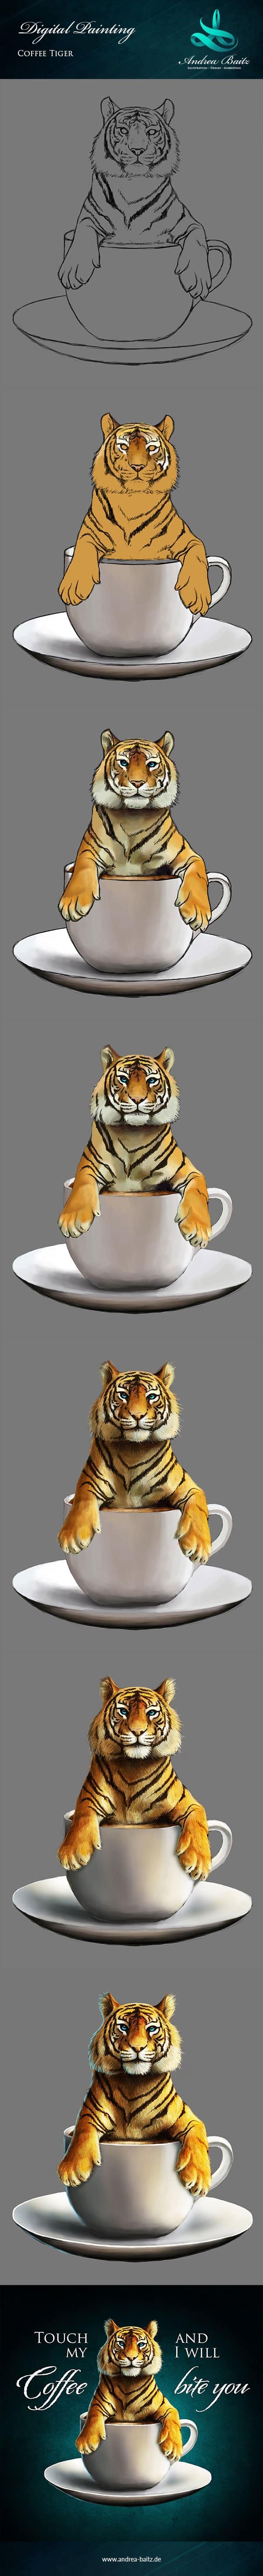 T-Shirt Design Touch my Coffee and I will bite you, T-Shirt Designer Andrea Baitz, Illustration, Digital Painting, Digital Illustration, Graphic Design, Ines Kampf Design, T-Shirt Designer Germany, Digital Painting Tutorial